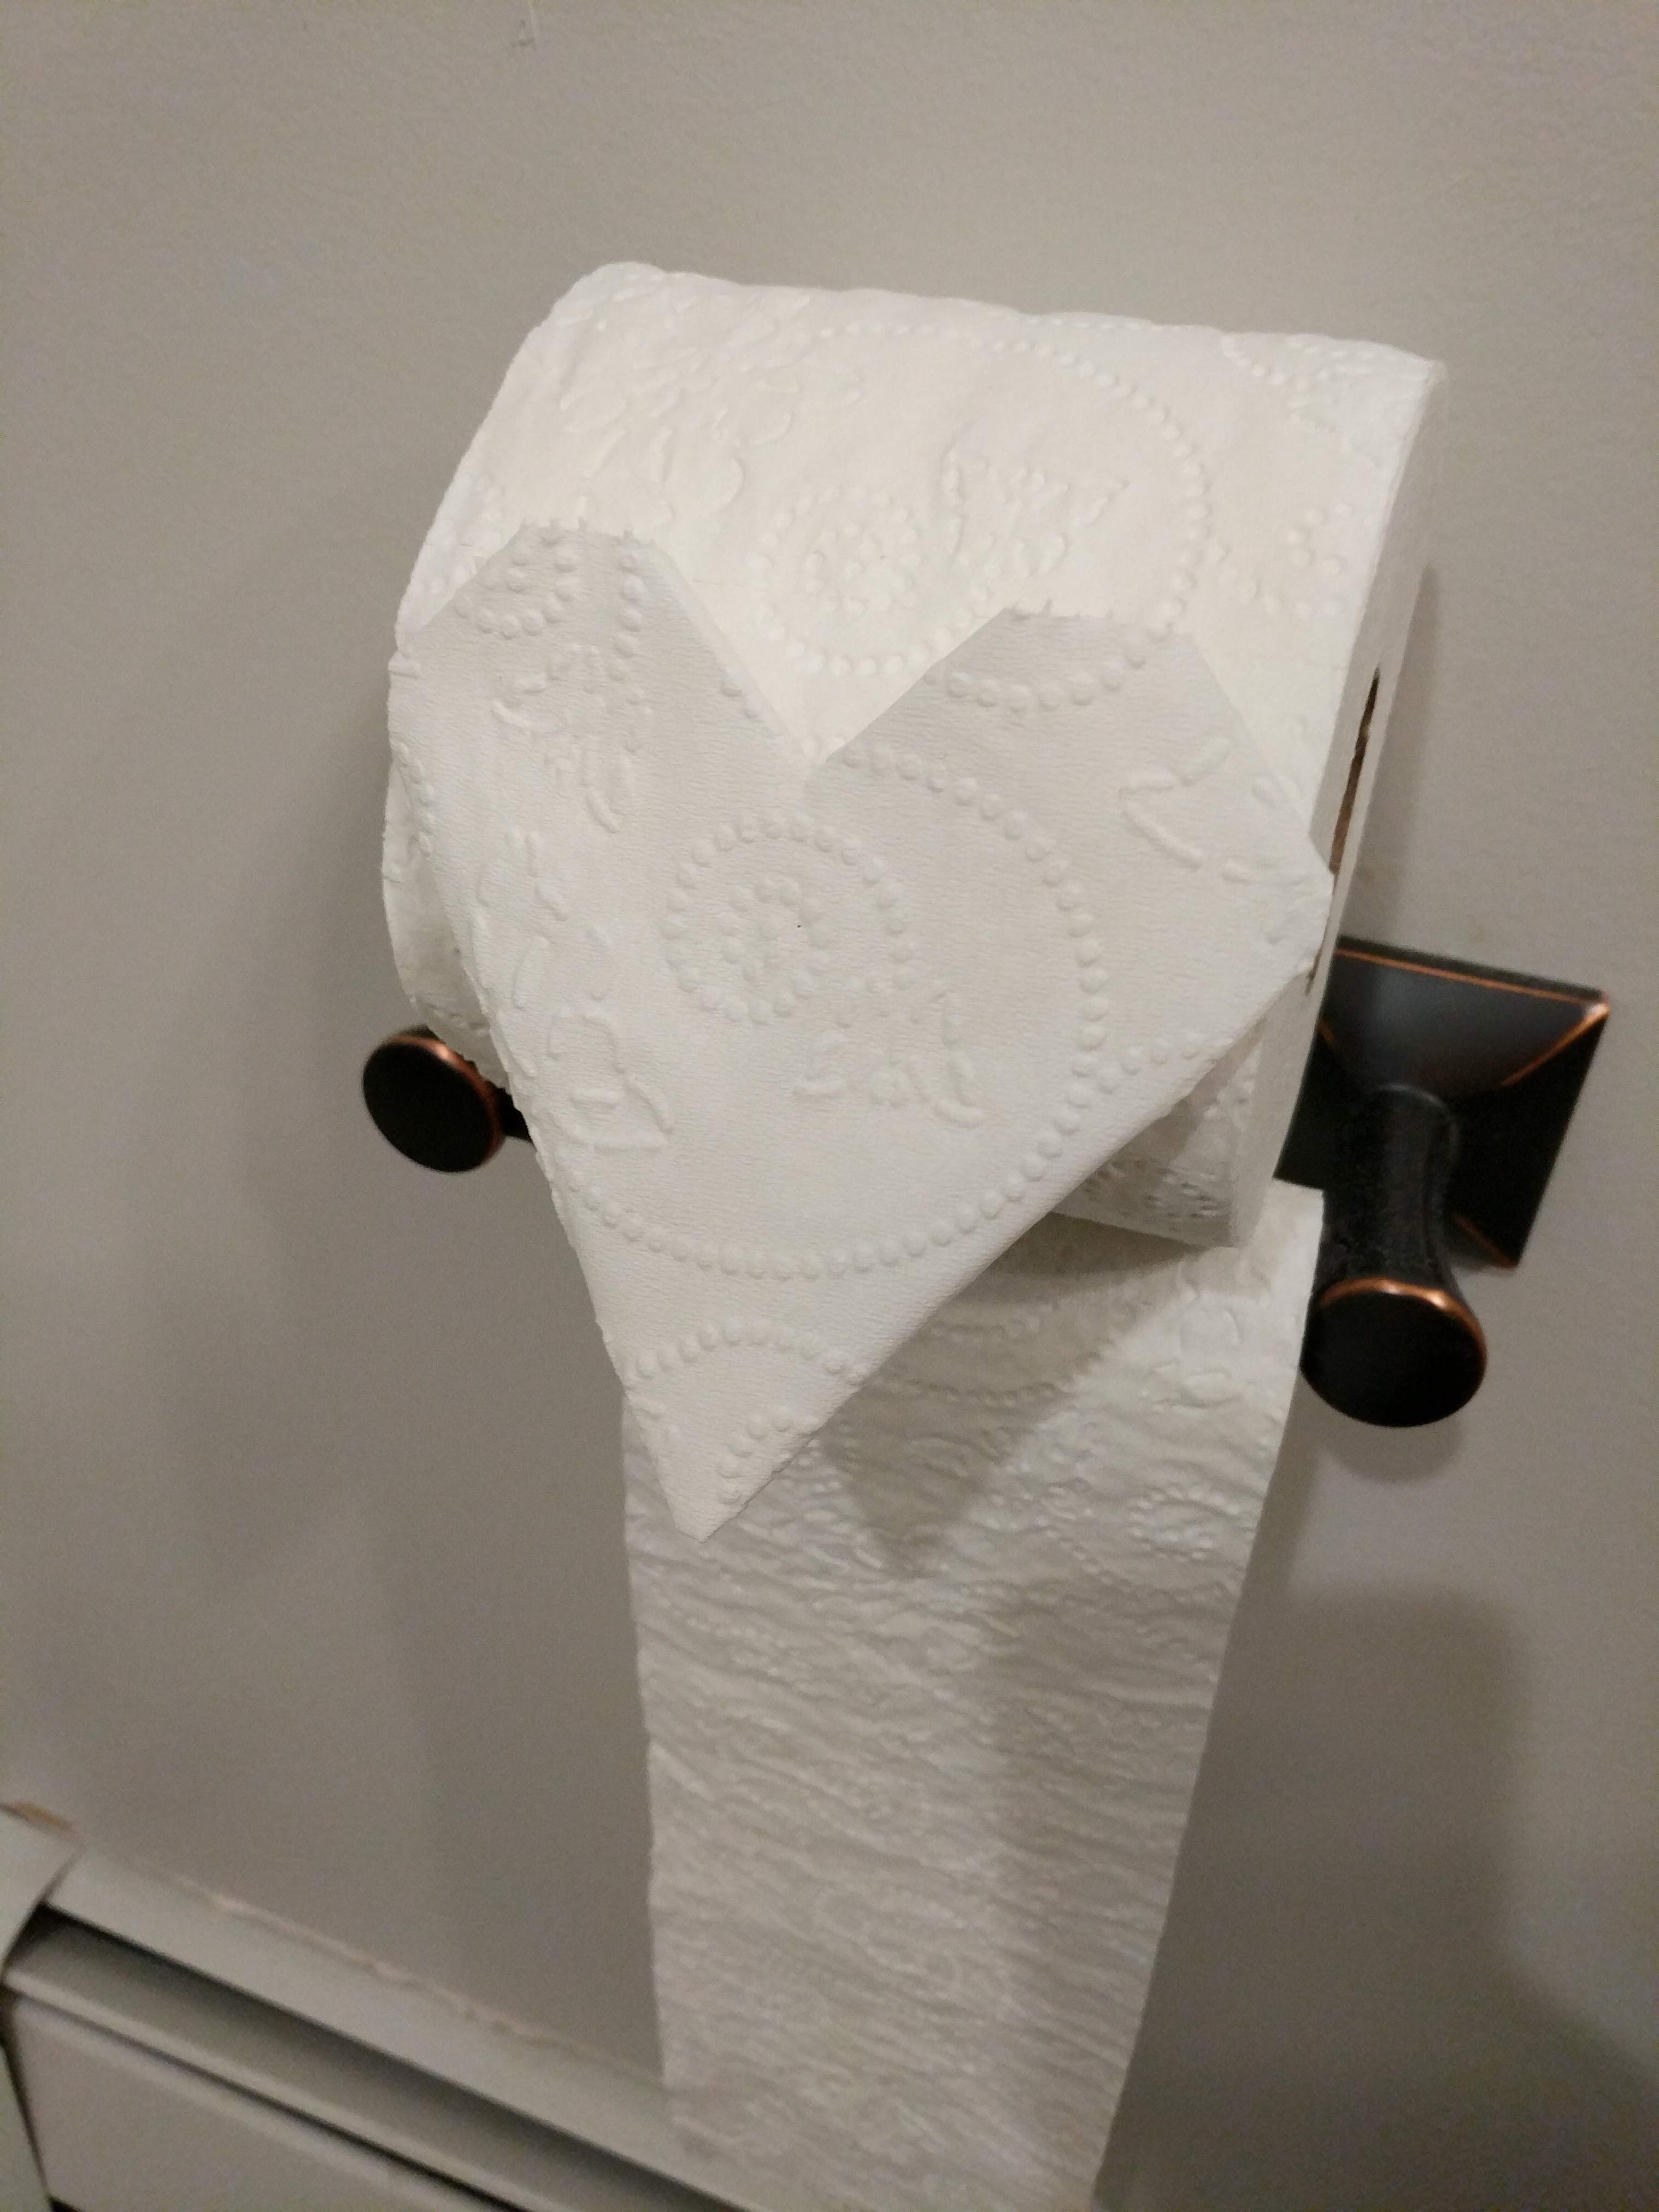 Origami Toilet Paper I Saw A Toilet Paper Origami Post Gave It A Try Album On Imgur